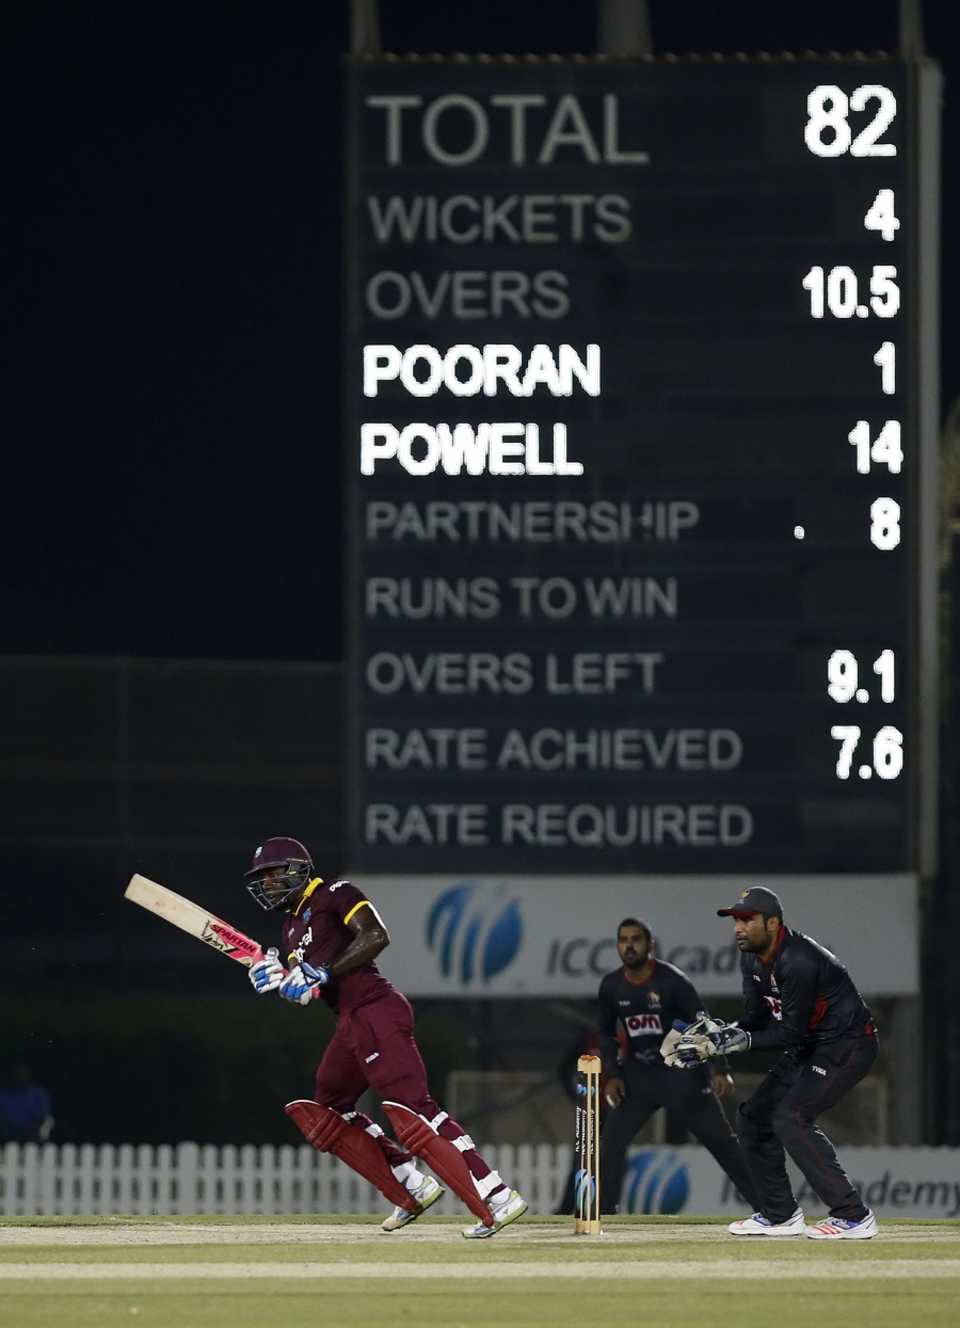 Rovman Powell plays a flick with the scoreboard in the background, Emirates Cricket Board XI v West Indians, Dubai, September 20, 2016